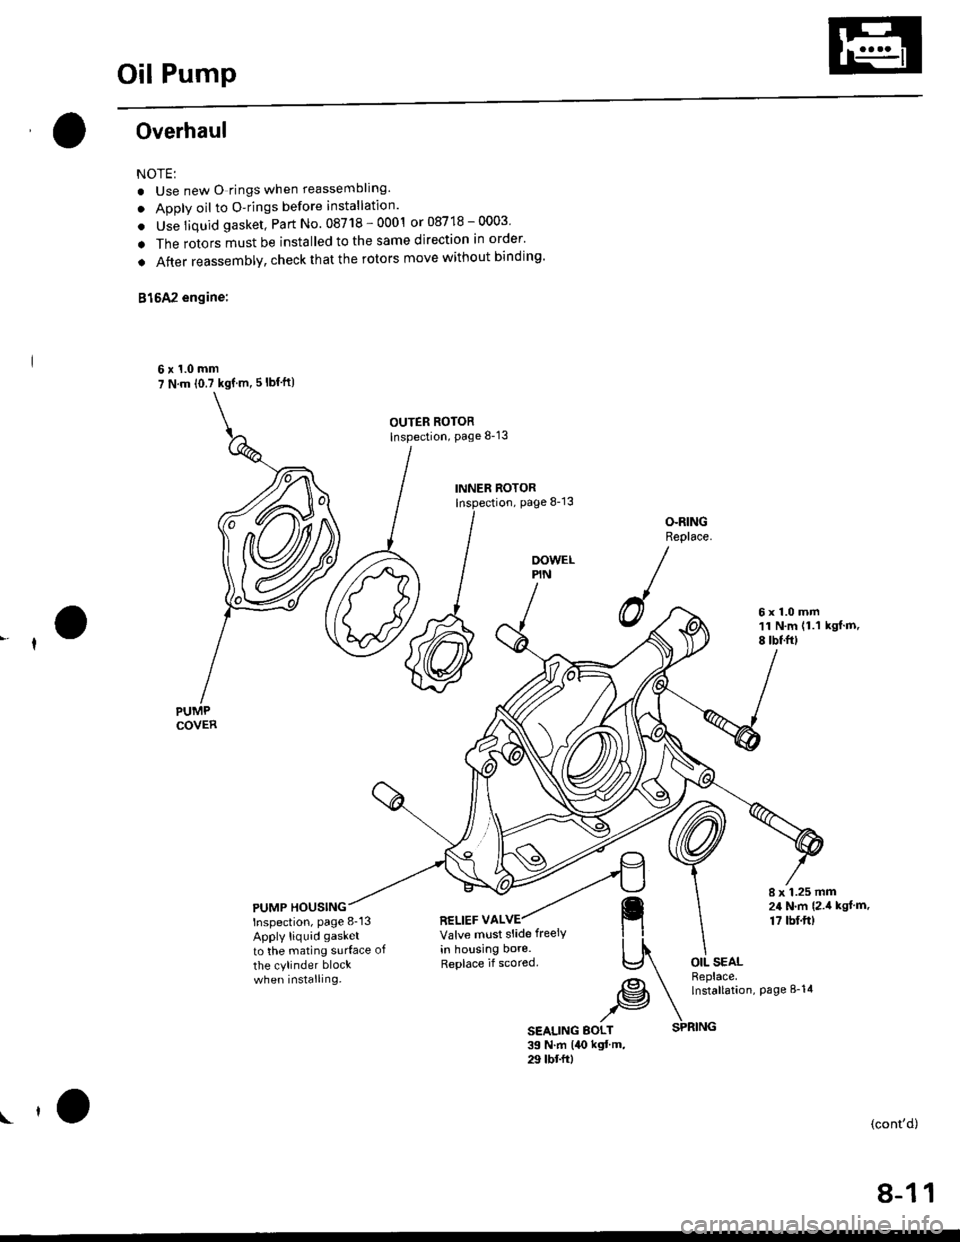 HONDA CIVIC 2000 6.G Workshop Manual Oil Pump
Overhaul
NOTE:
. Use new O rings when reassembllng.
. Apply oil to O-rings before installation.
. Use liquid gasket, Part No. 08718 - 0001 or 08718 - 0003
. The rotors must be installed to th